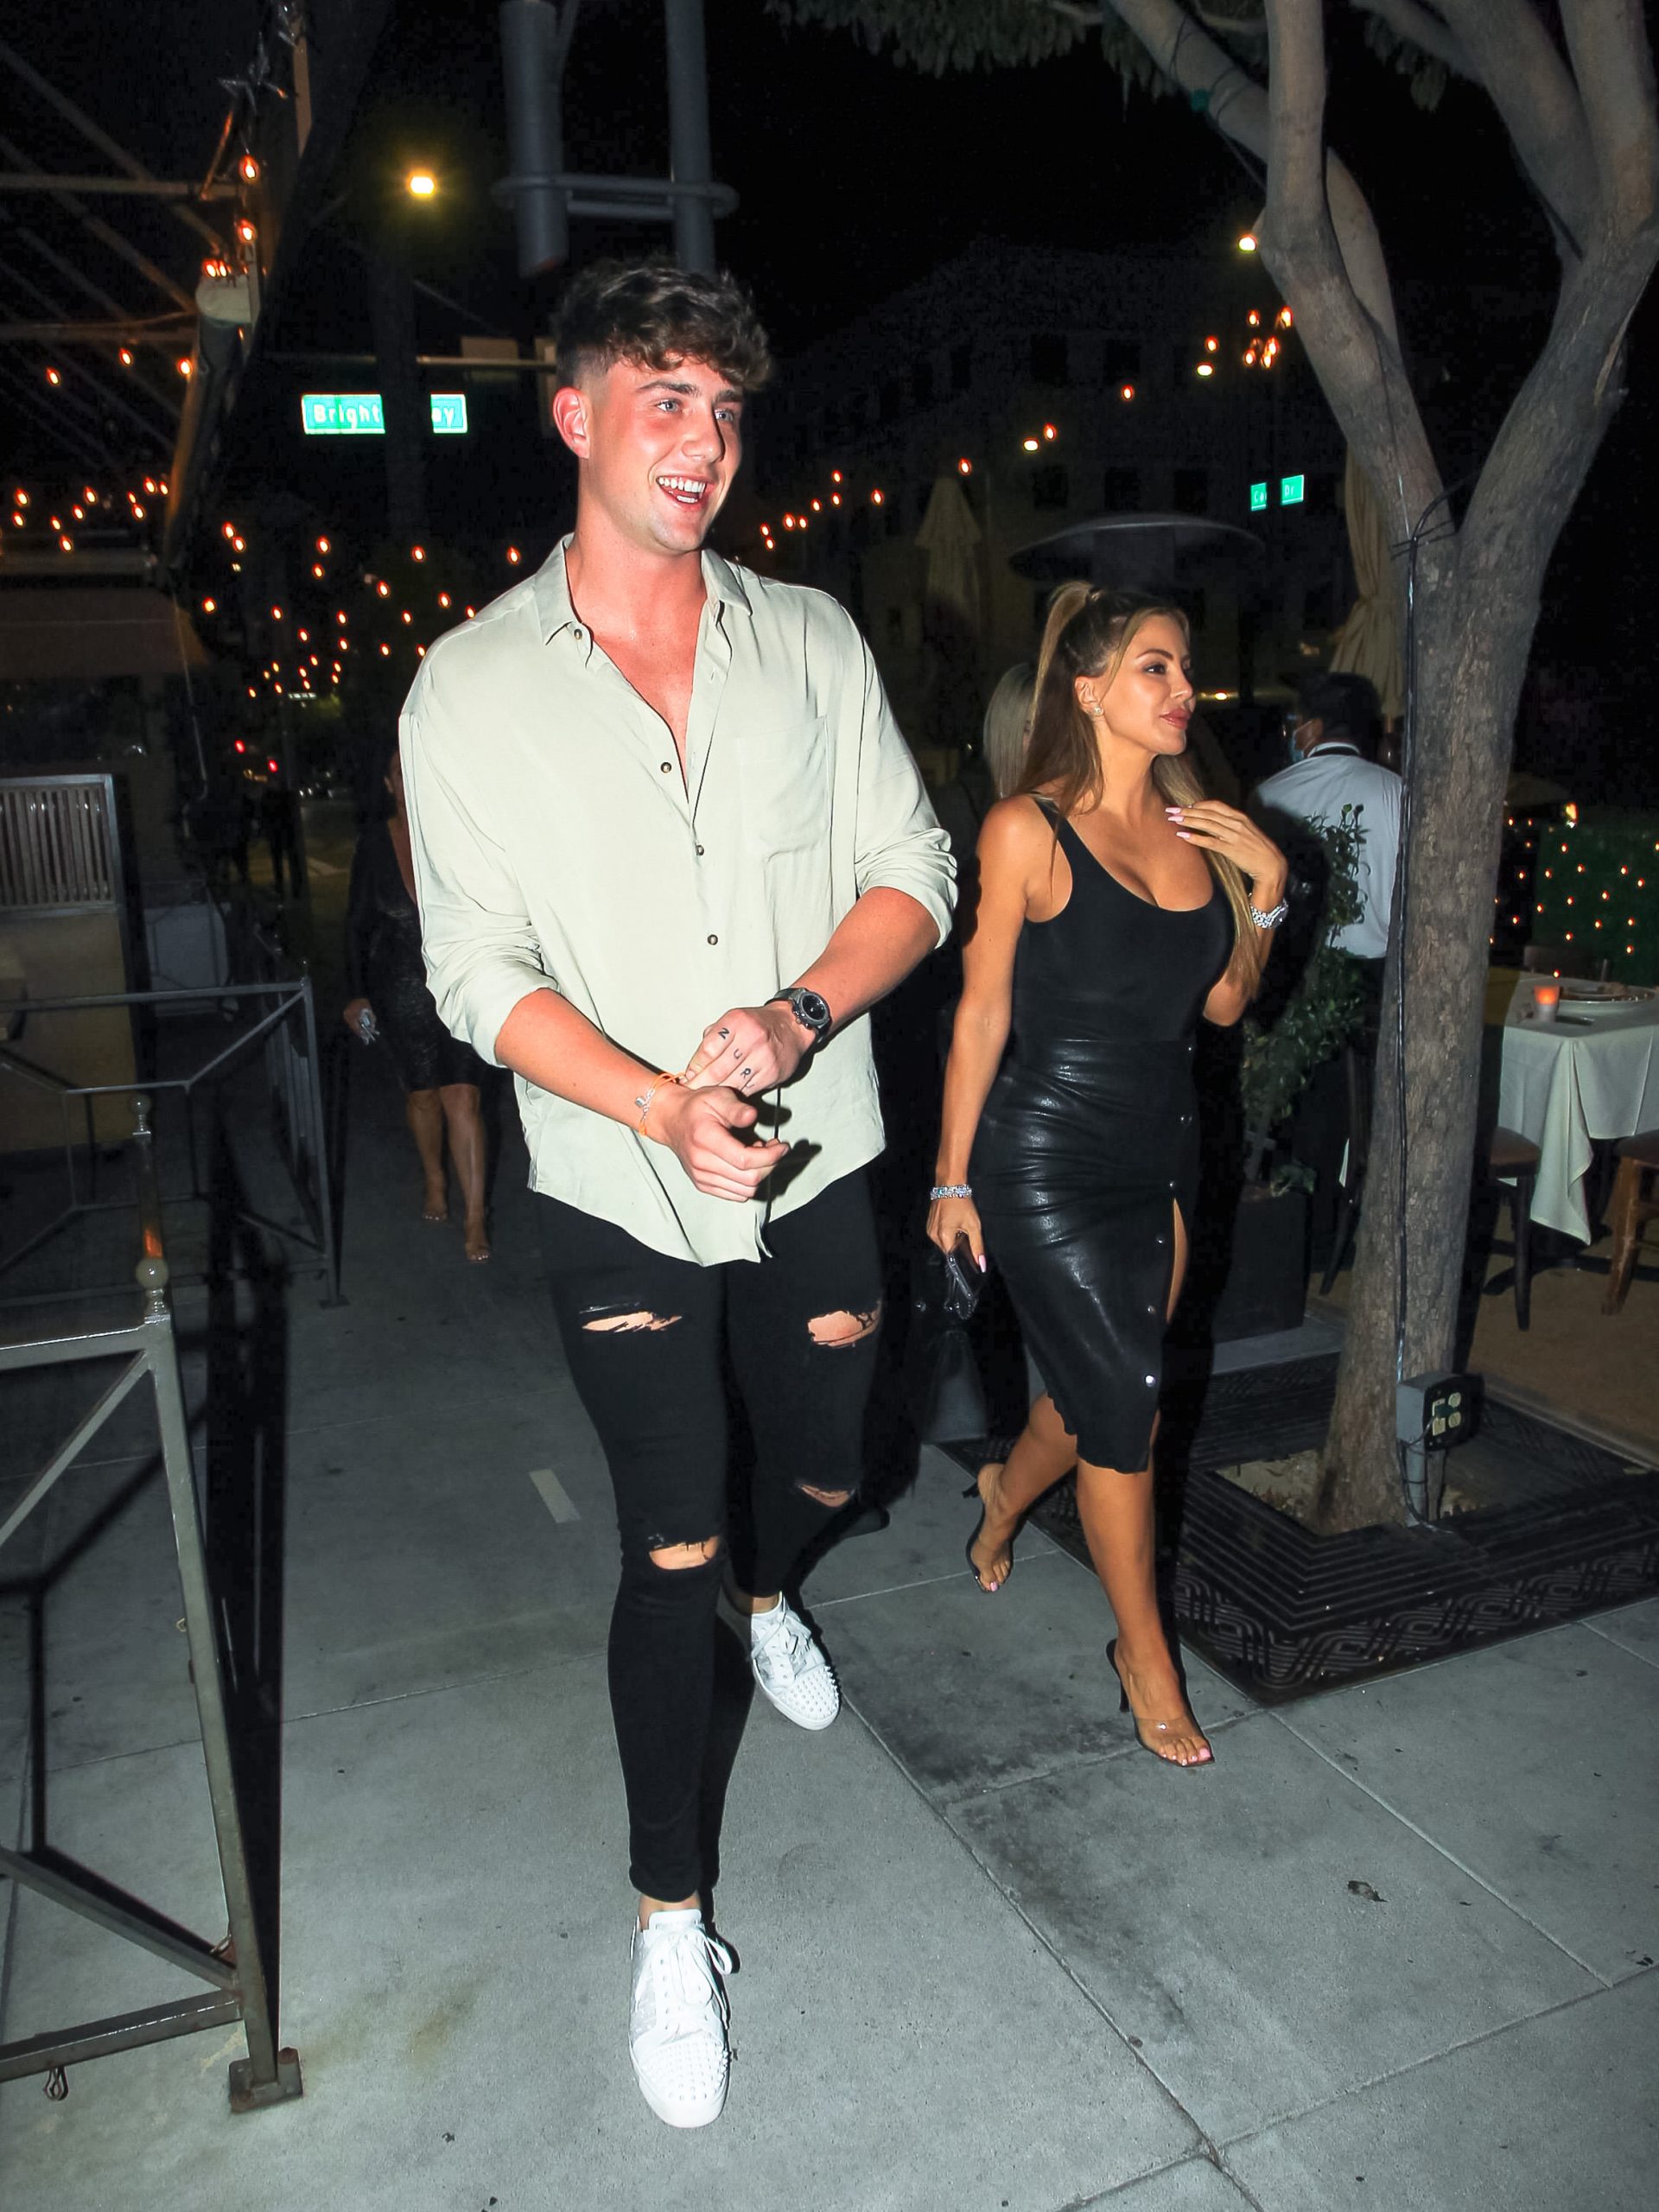 Is ‘Too Hot To Handle’ Star Harry Jowsey Dating Kim Kardashian West’s Former BFF Larsa Pippen?